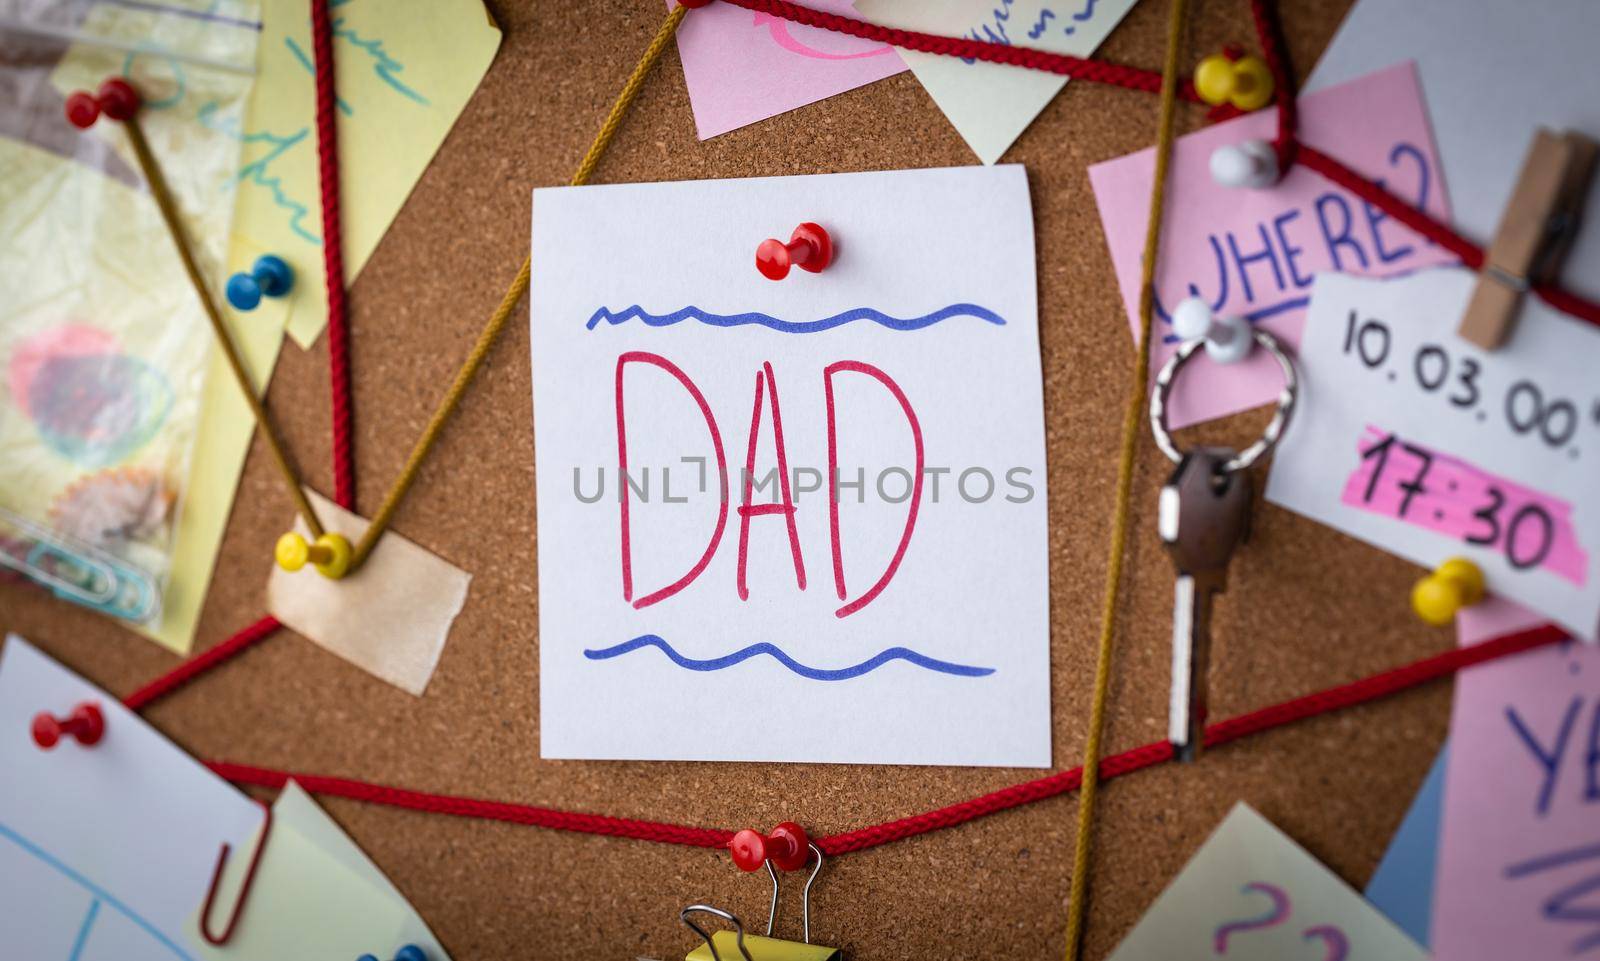 Dad search concept. Close-up view of a detective board with evidence. In the center is a white sheet attached with a red pin with the text Dad.